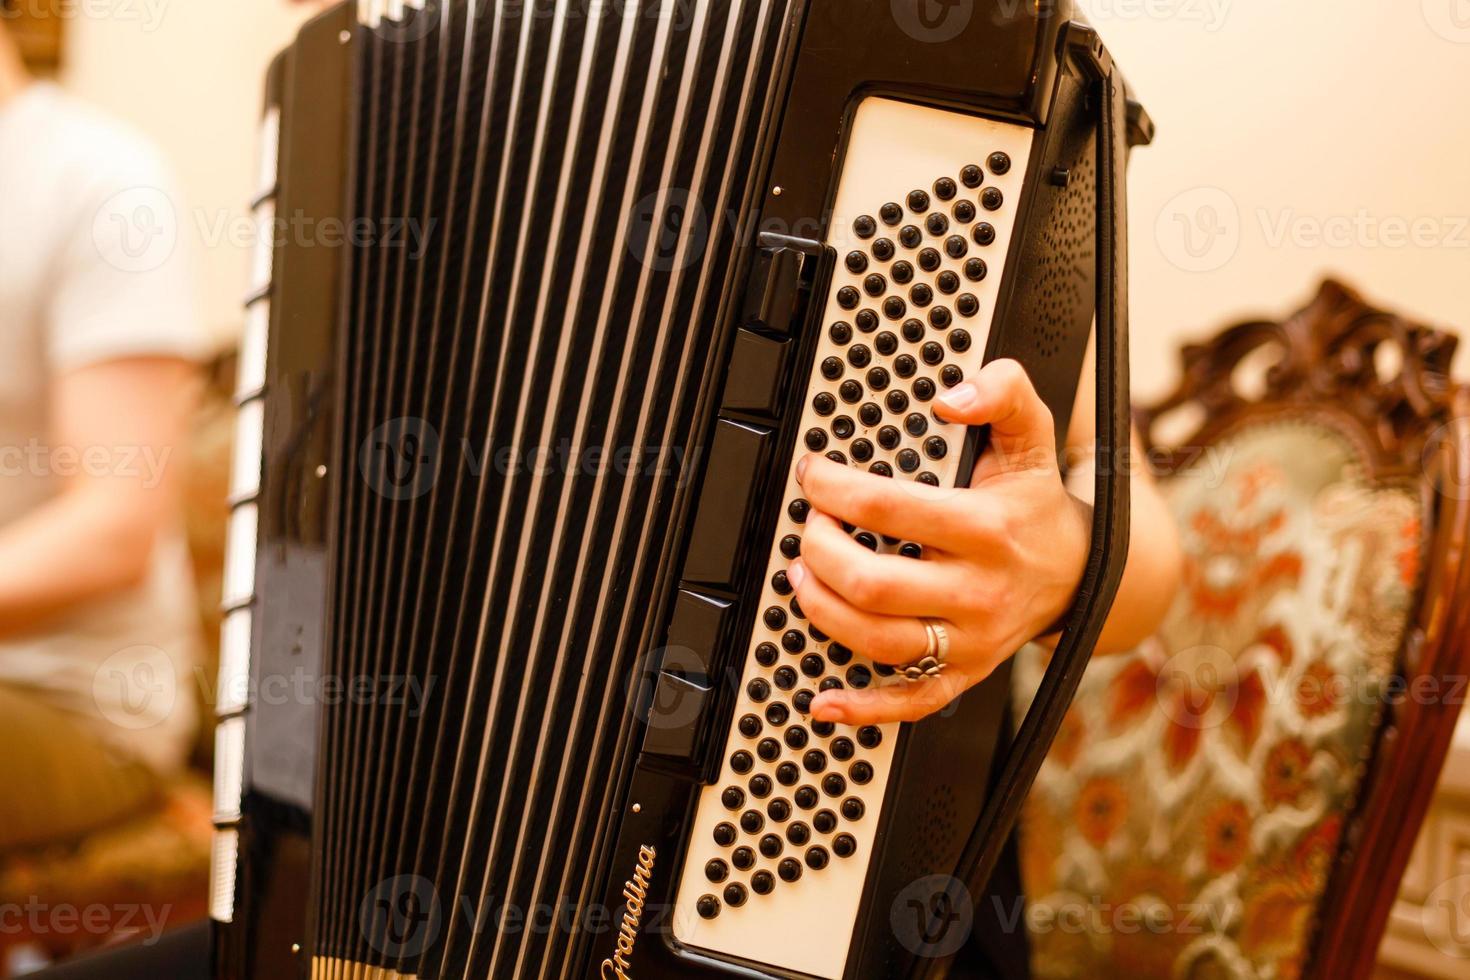 Accordion player The musician playing the accordion player instrument photo